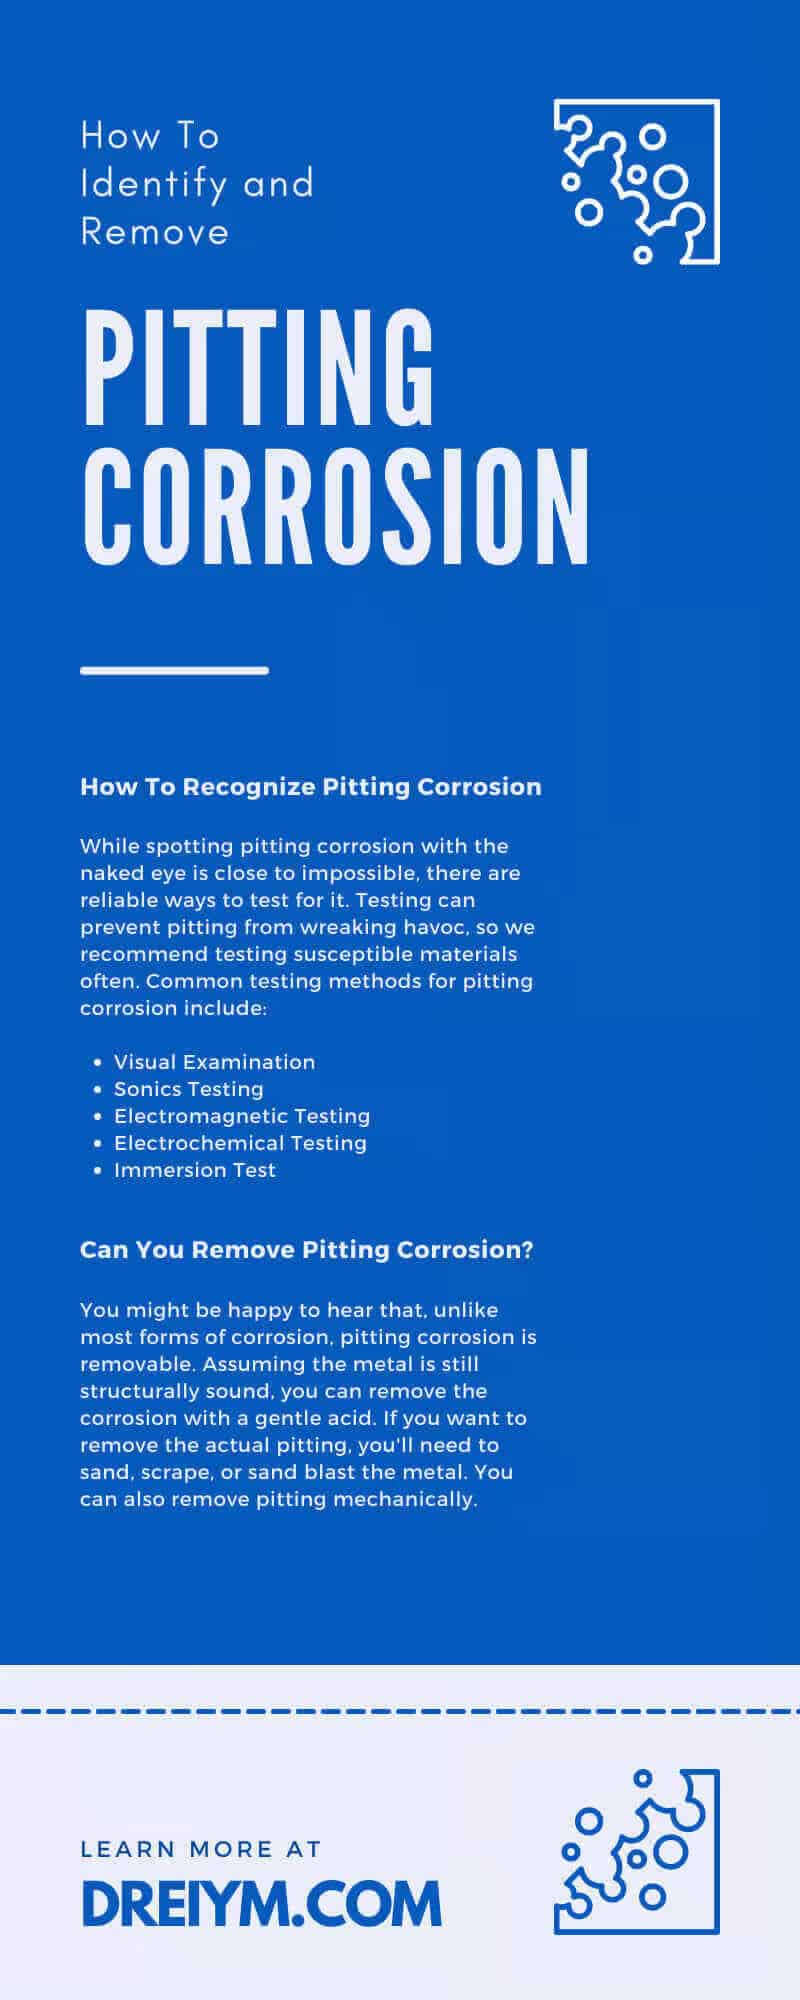 How To Identify and Remove Pitting Corrosion